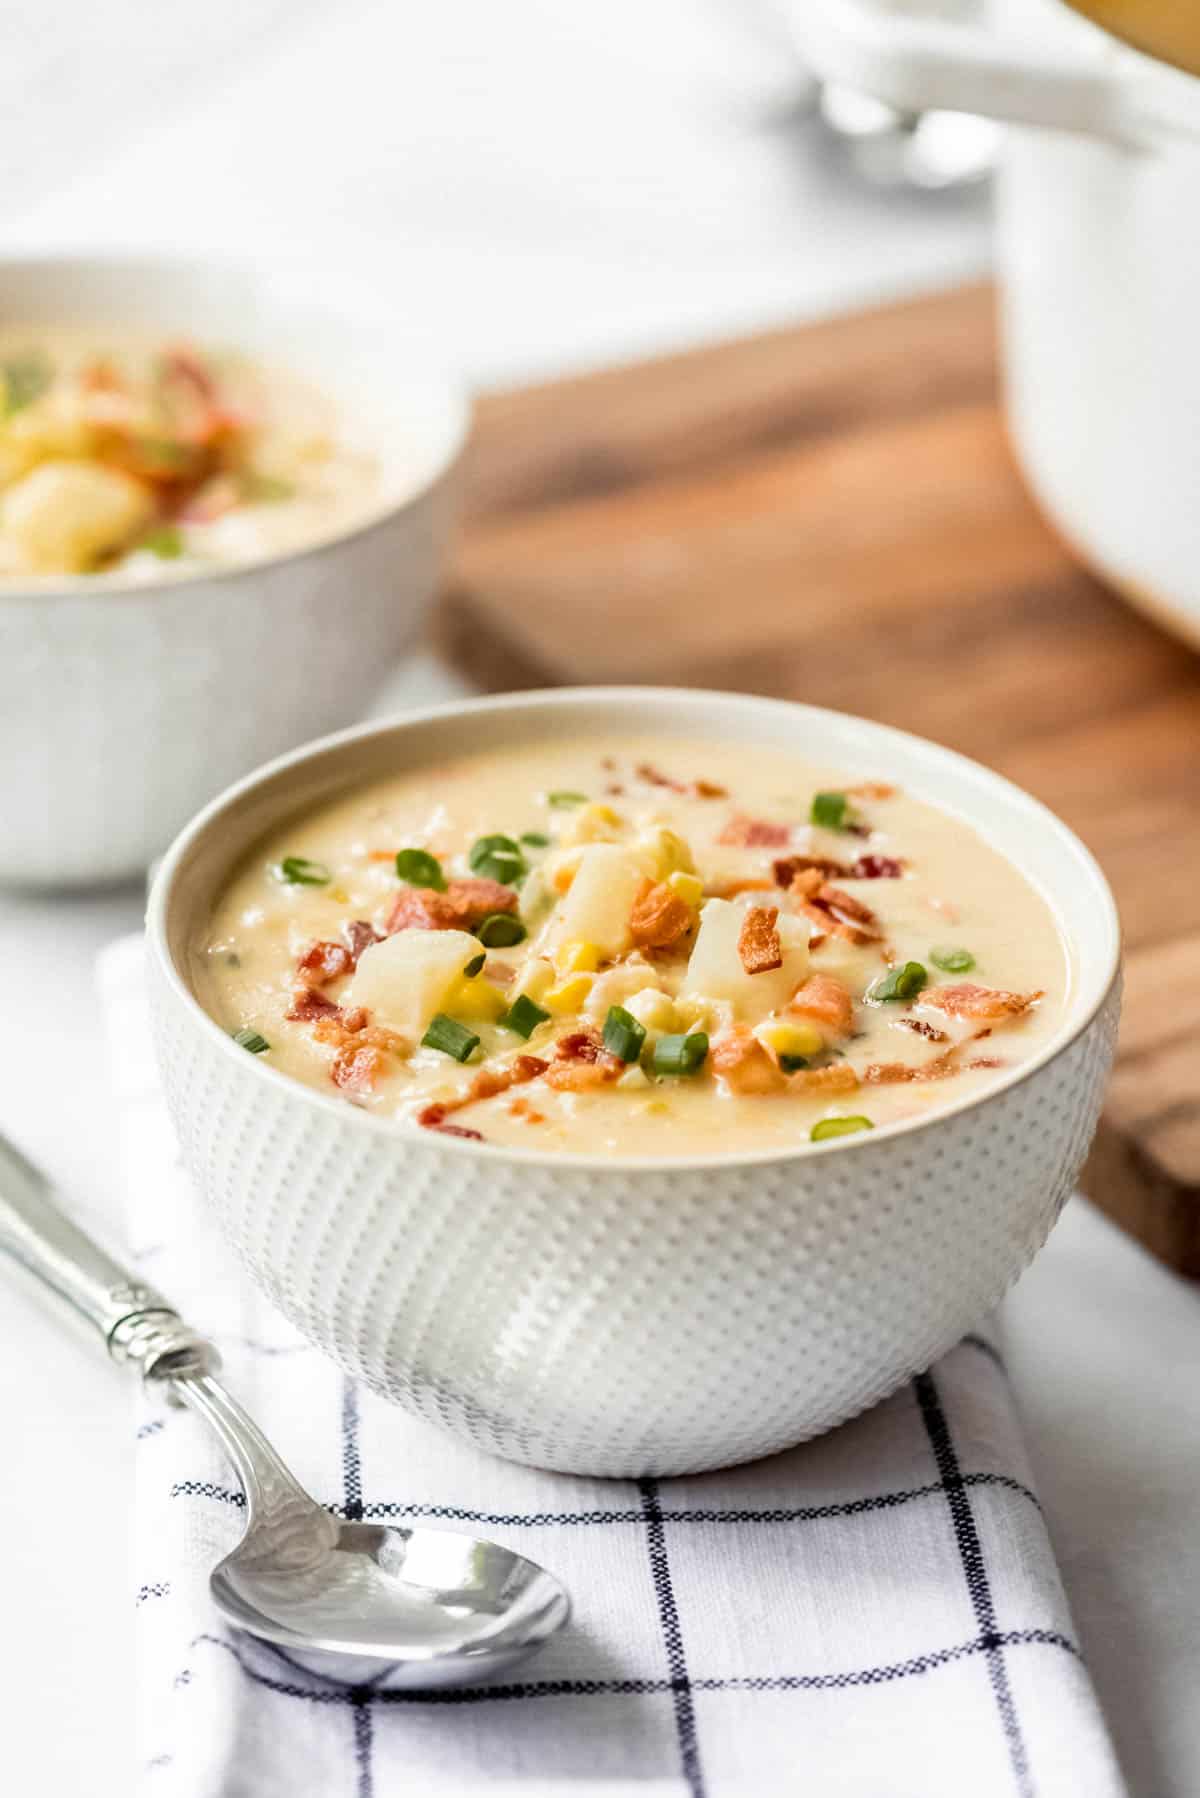 A bowl of corn chowder with potatoes and bacon.